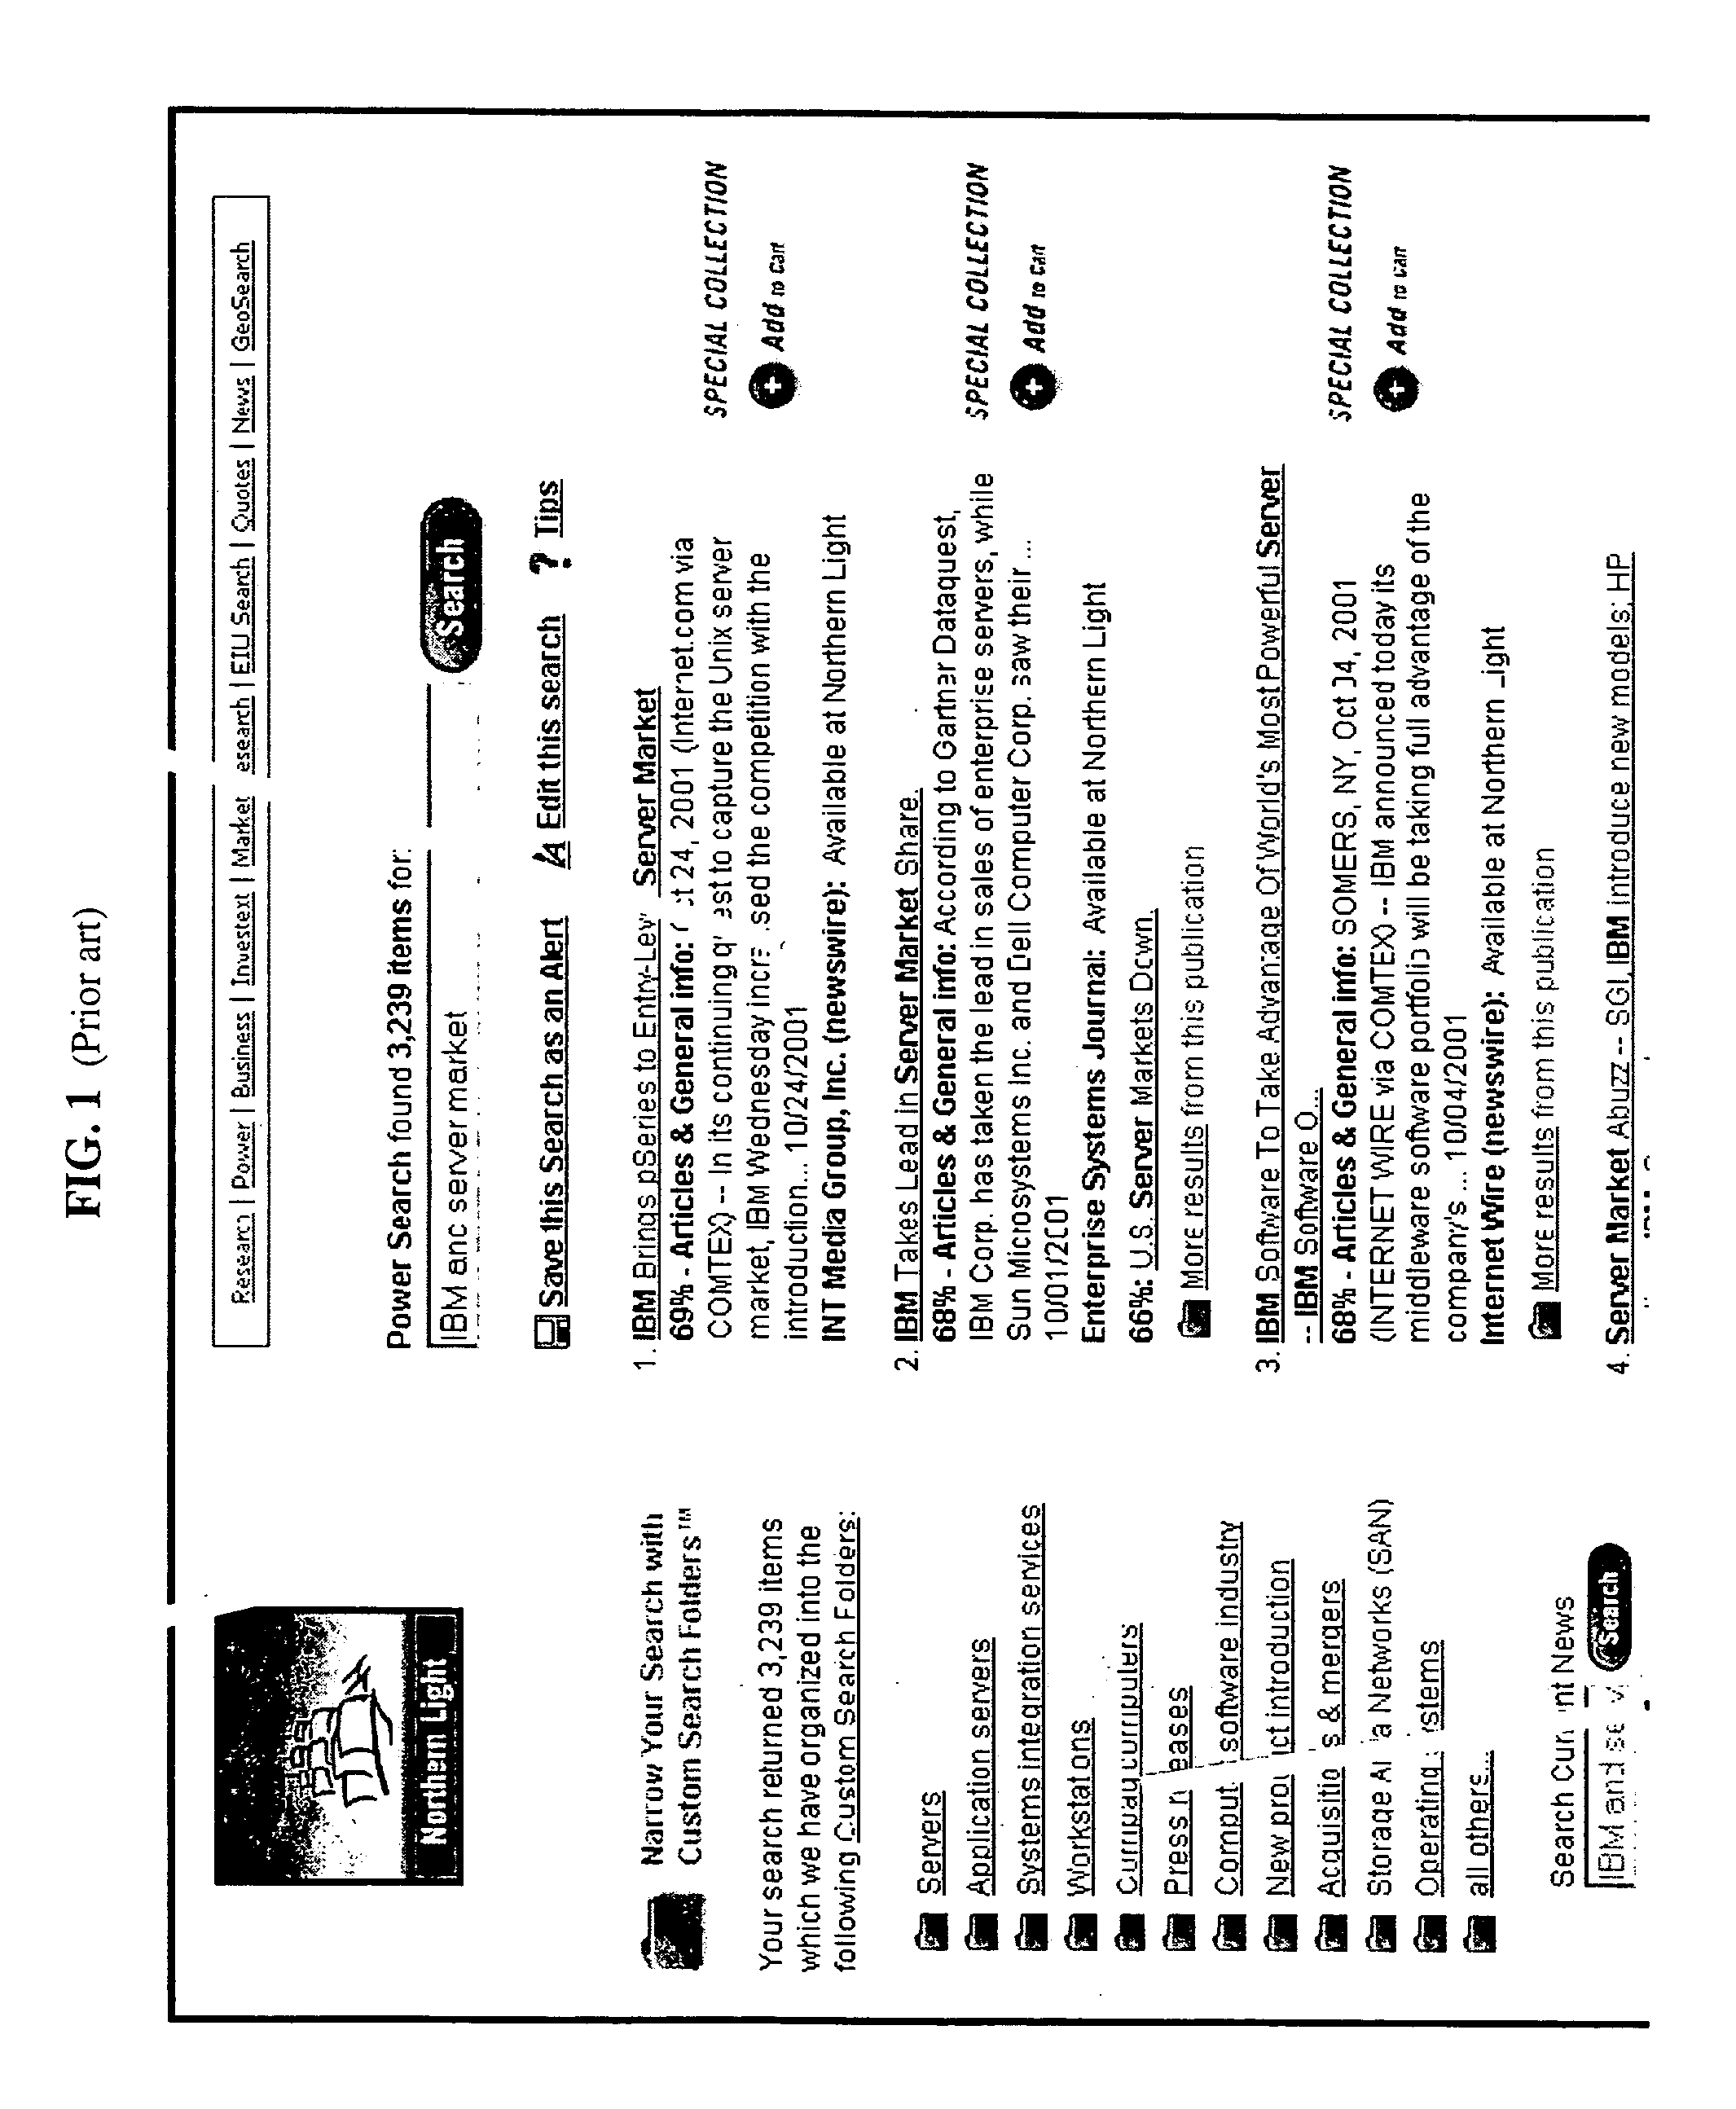 Method and apparatus for selecting, analyzing, and visualizing related database records as a network